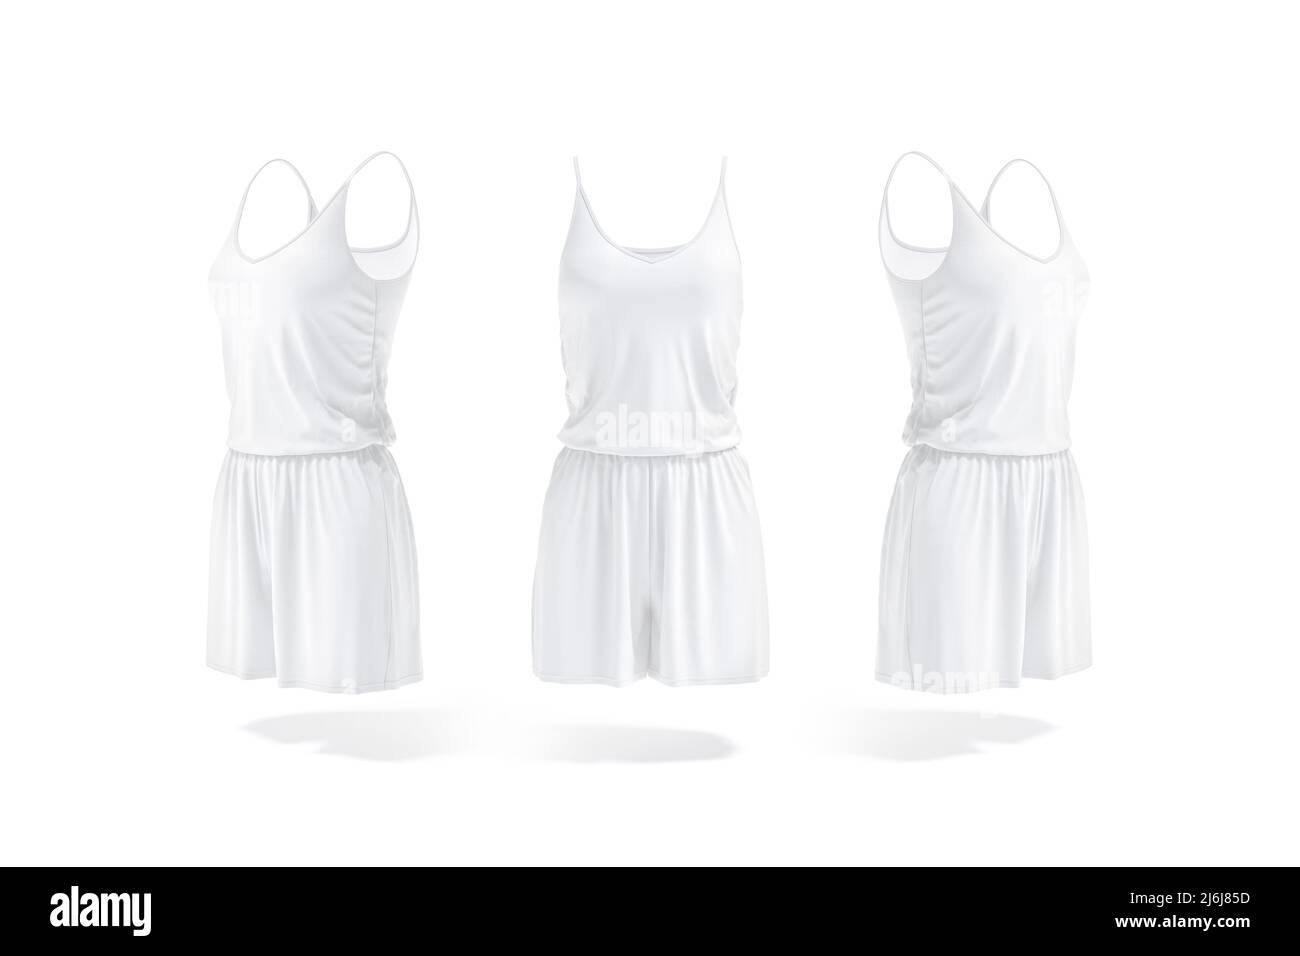 Blank white women romper mockup, front and side view Stock Photo